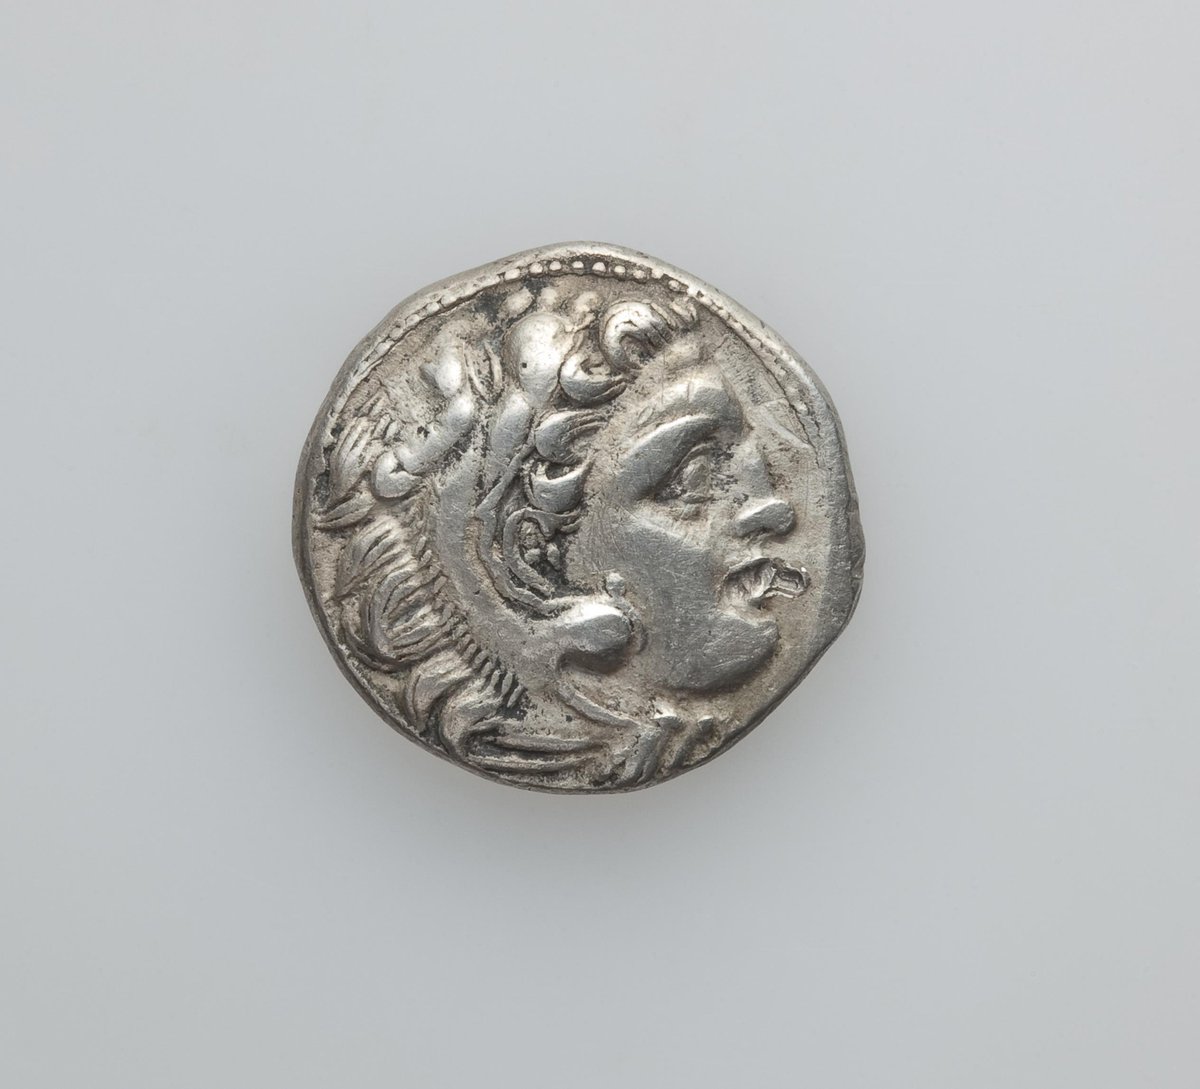 A Drachma, showing the head of Alexander the Great 336-323s BC who died on this day in 323BC From the numismatic department of the State Hermitage Museum #hermitageuk #hermitagemuseum #numismatics